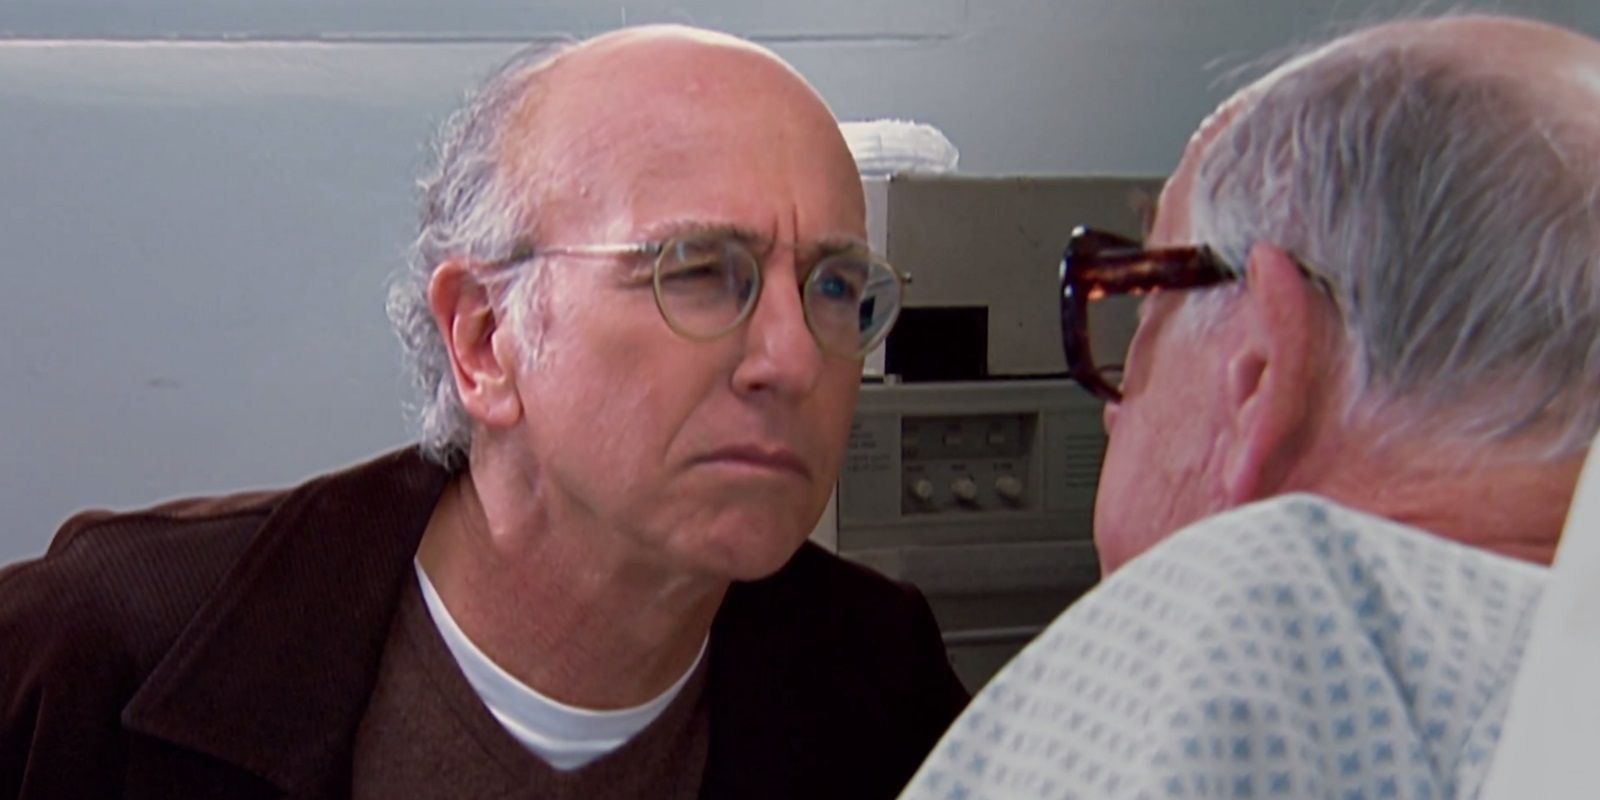 Larry David staring suspiciously at his father in Curb Your Enthusiasm season 5